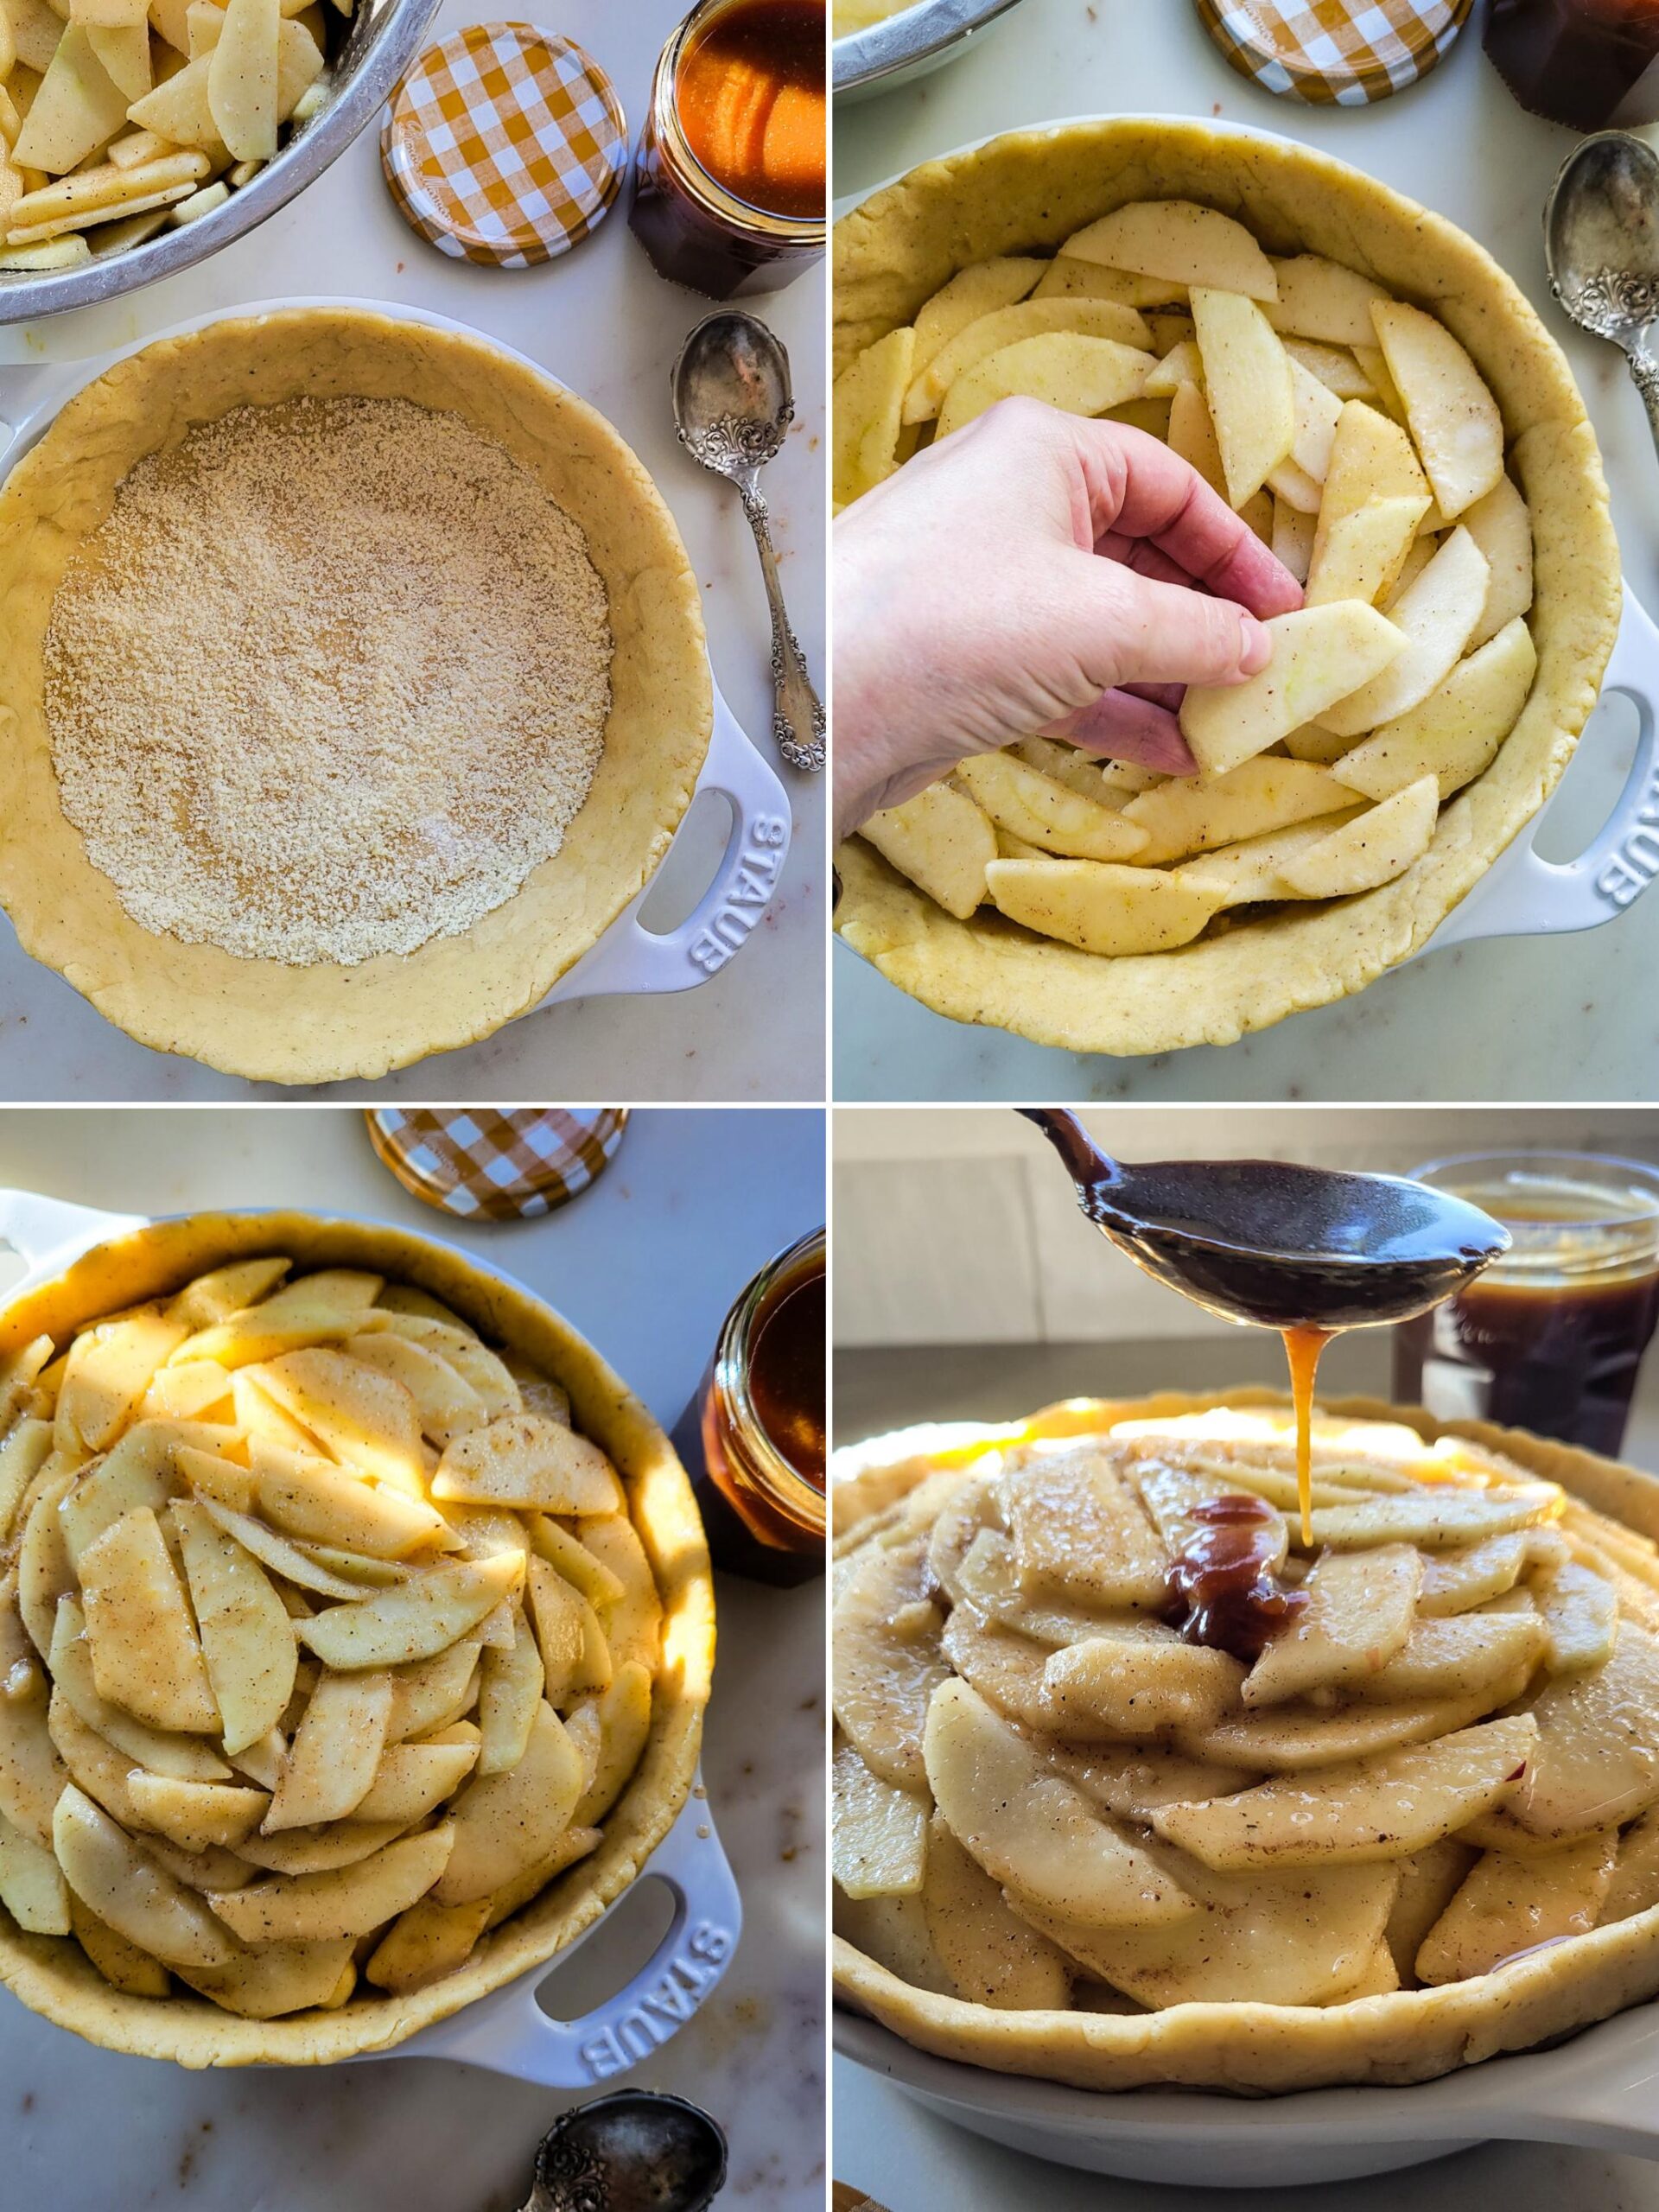 Collage showing the assembling of a Salted bourbon Caramel Apple PIe.